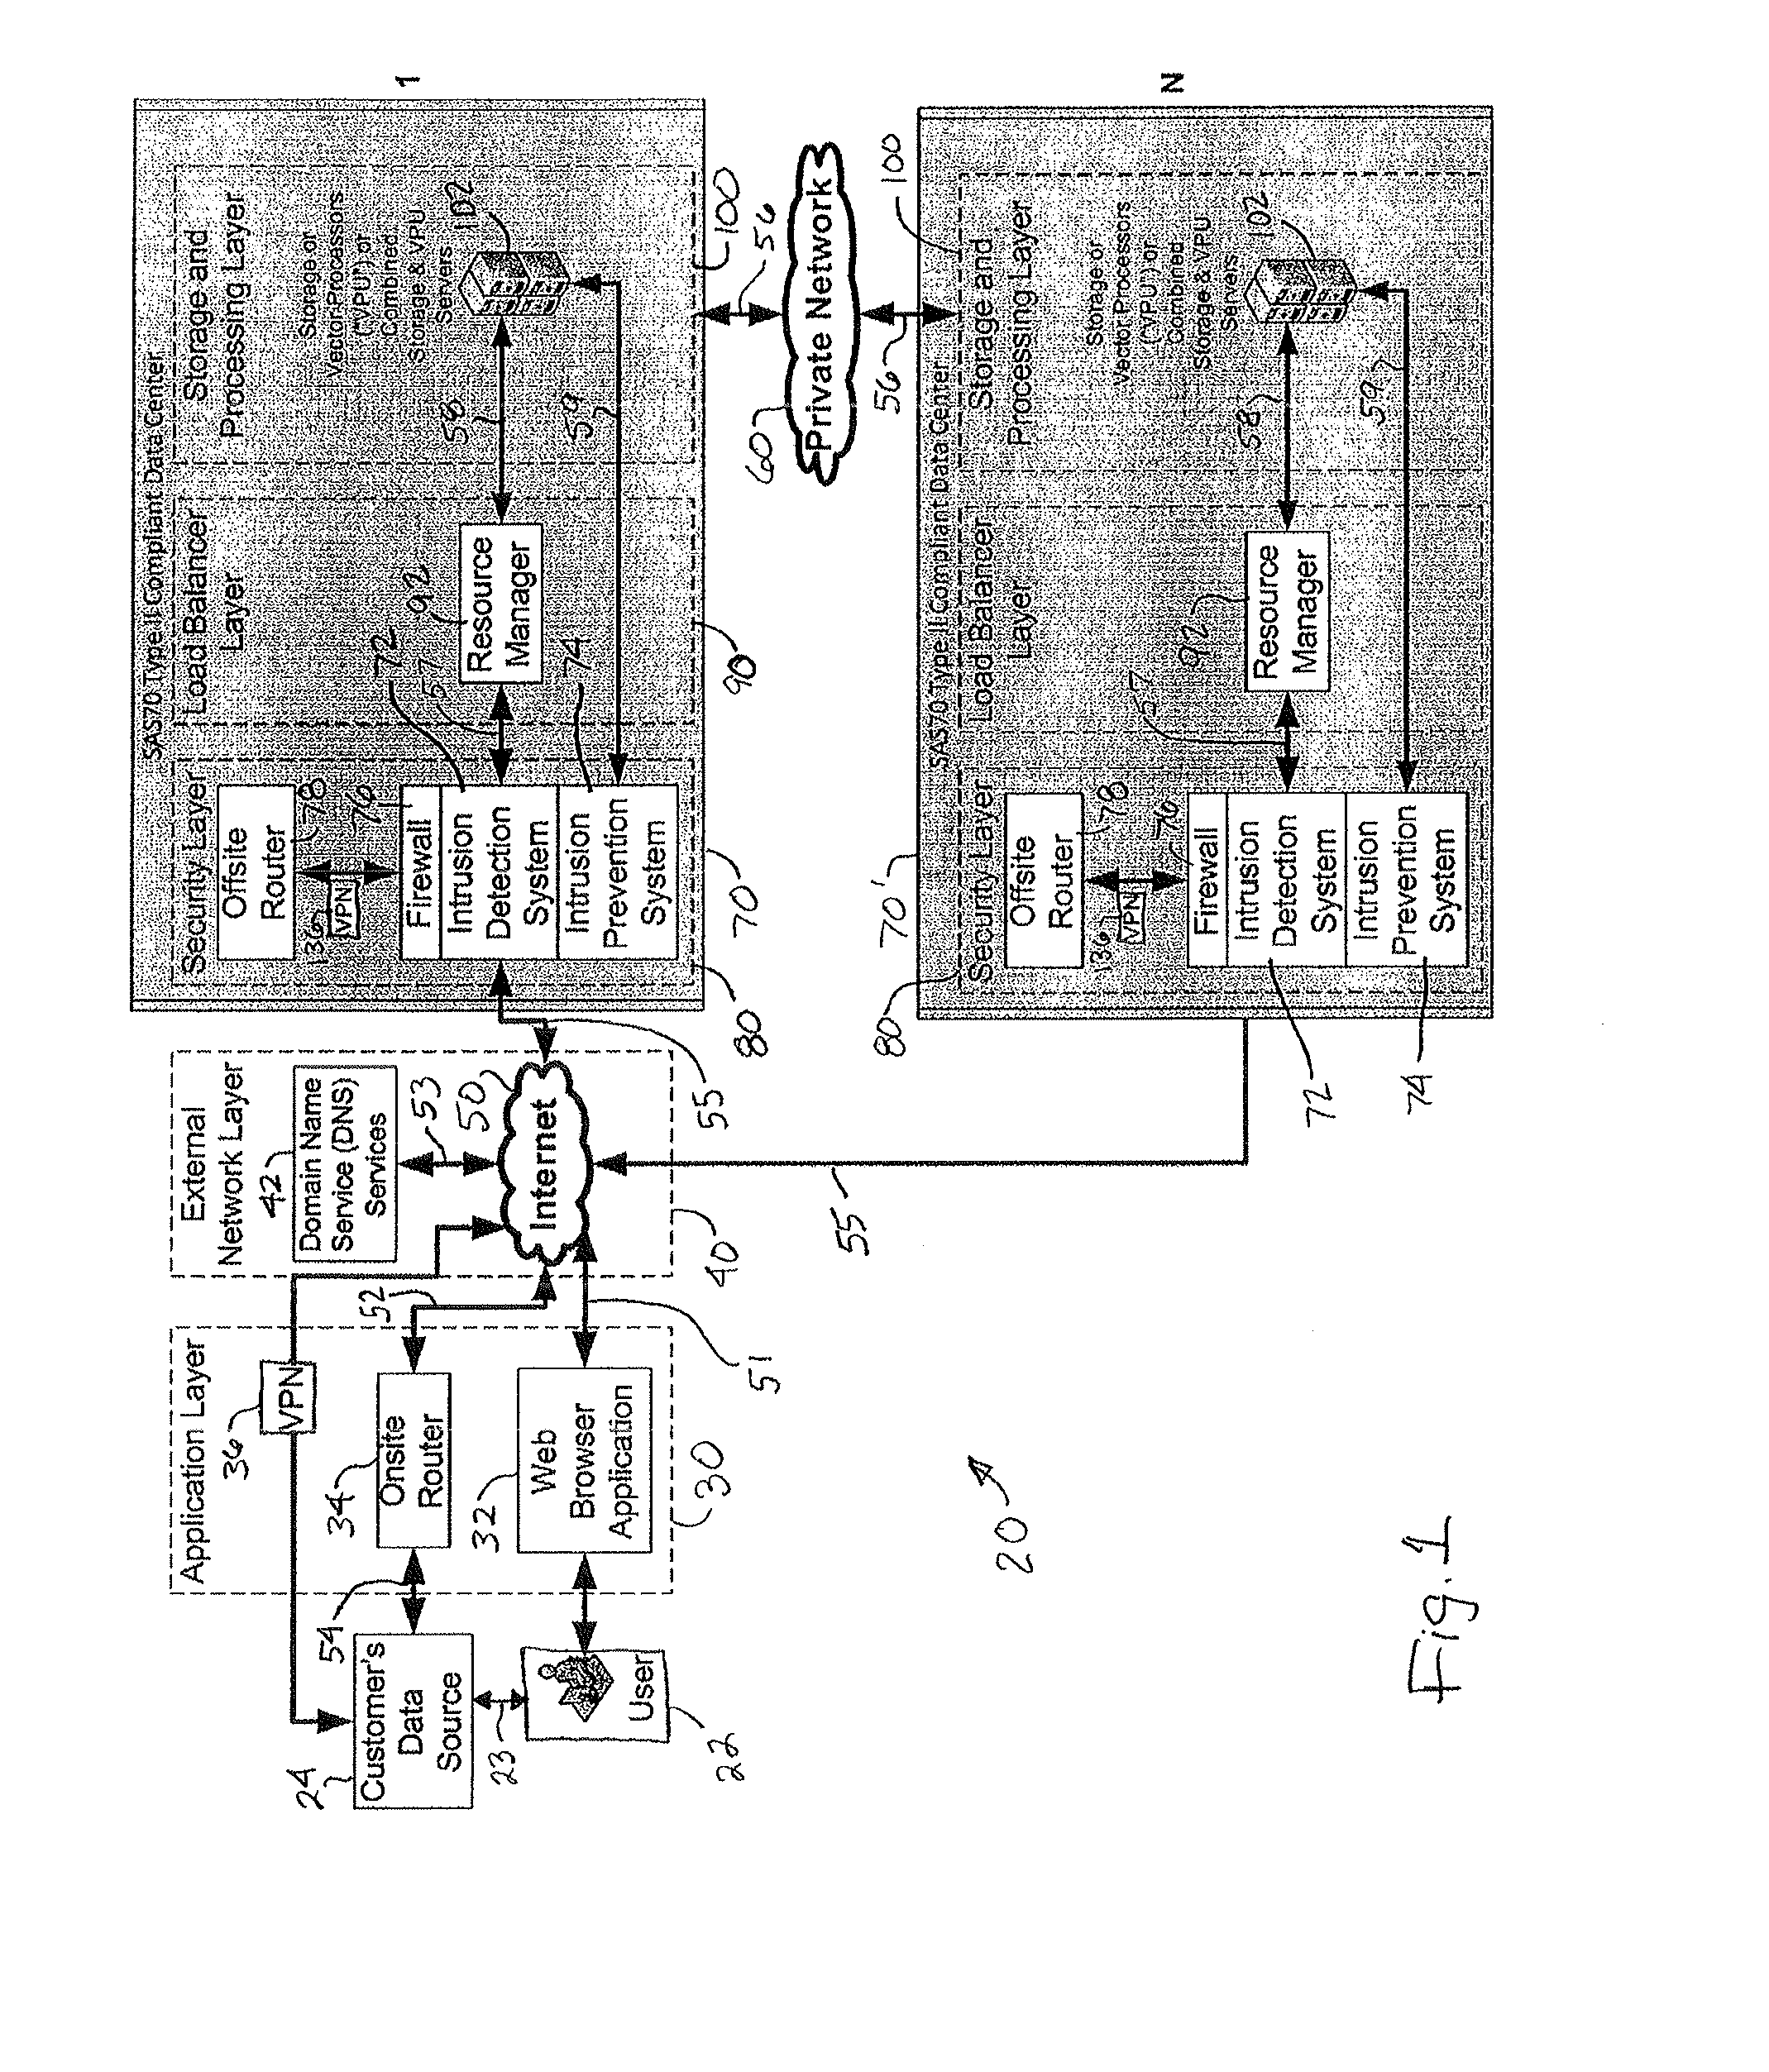 Method and system for fast access to advanced visualization of medical scans using a dedicated web portal